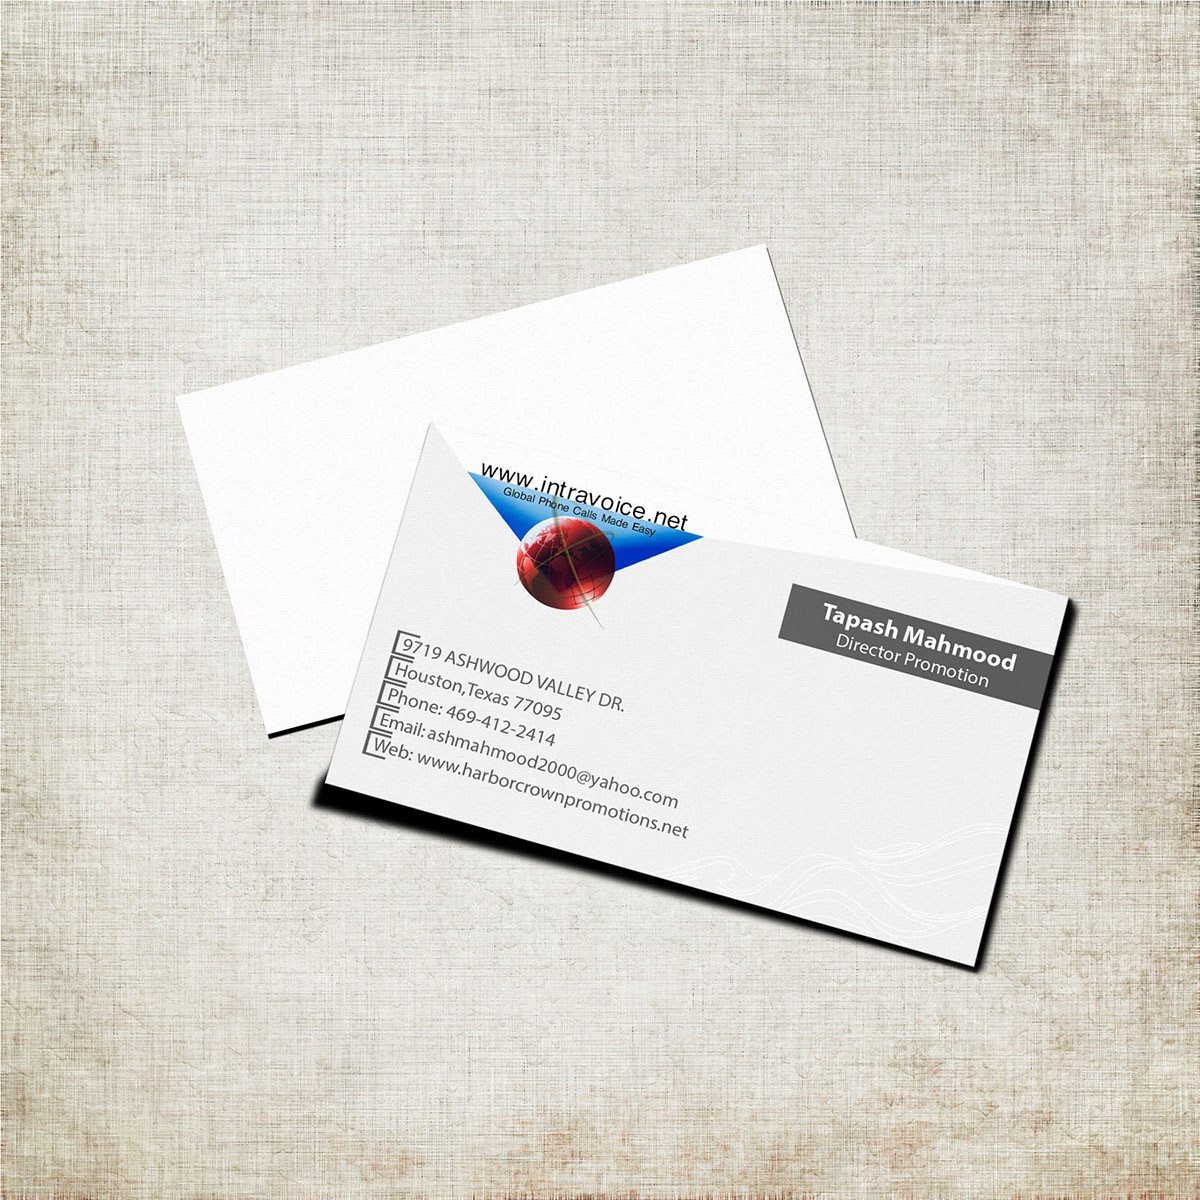 Business_Card